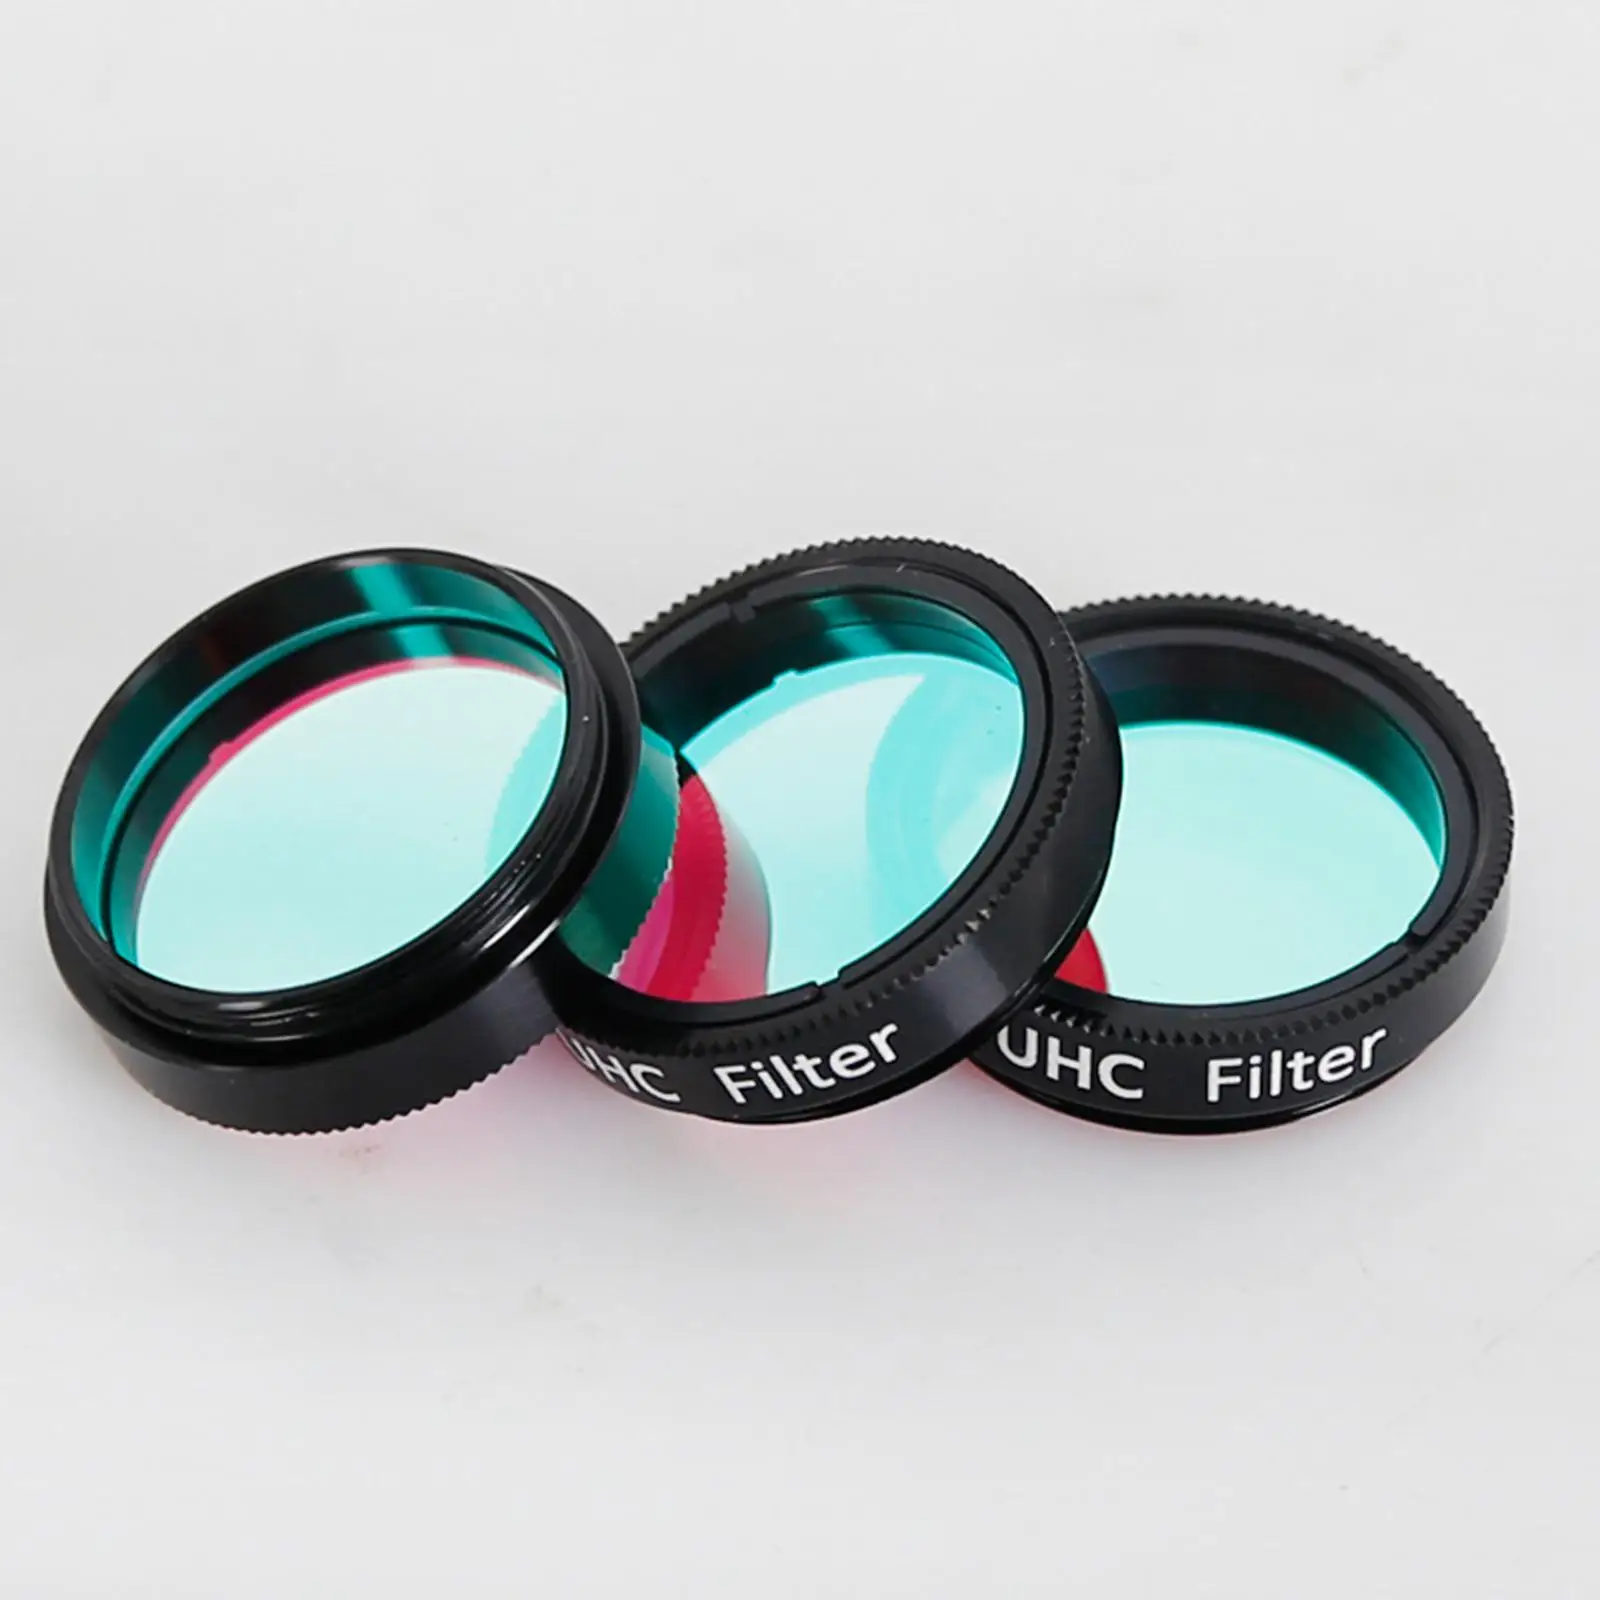 1.25 inch Uhc Filter for Deep Sky Visual Astronomical Photography Light Pollution Inhibition Lens High Contrast Filter